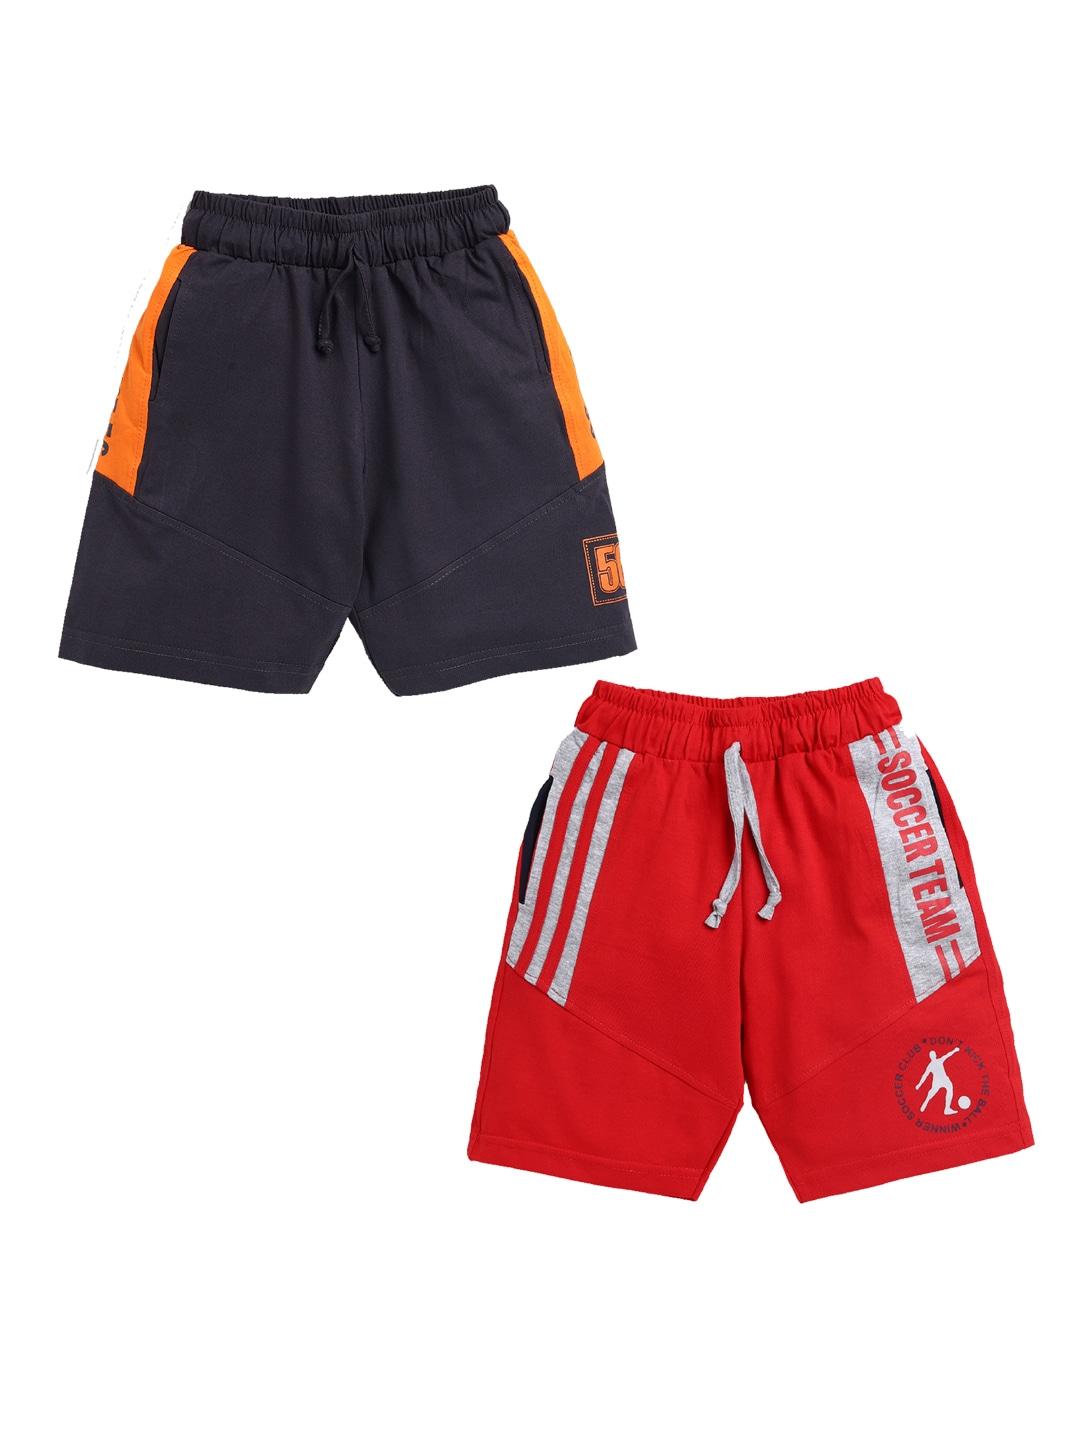 todd n teen pack of 2 boys red cotton sports shorts